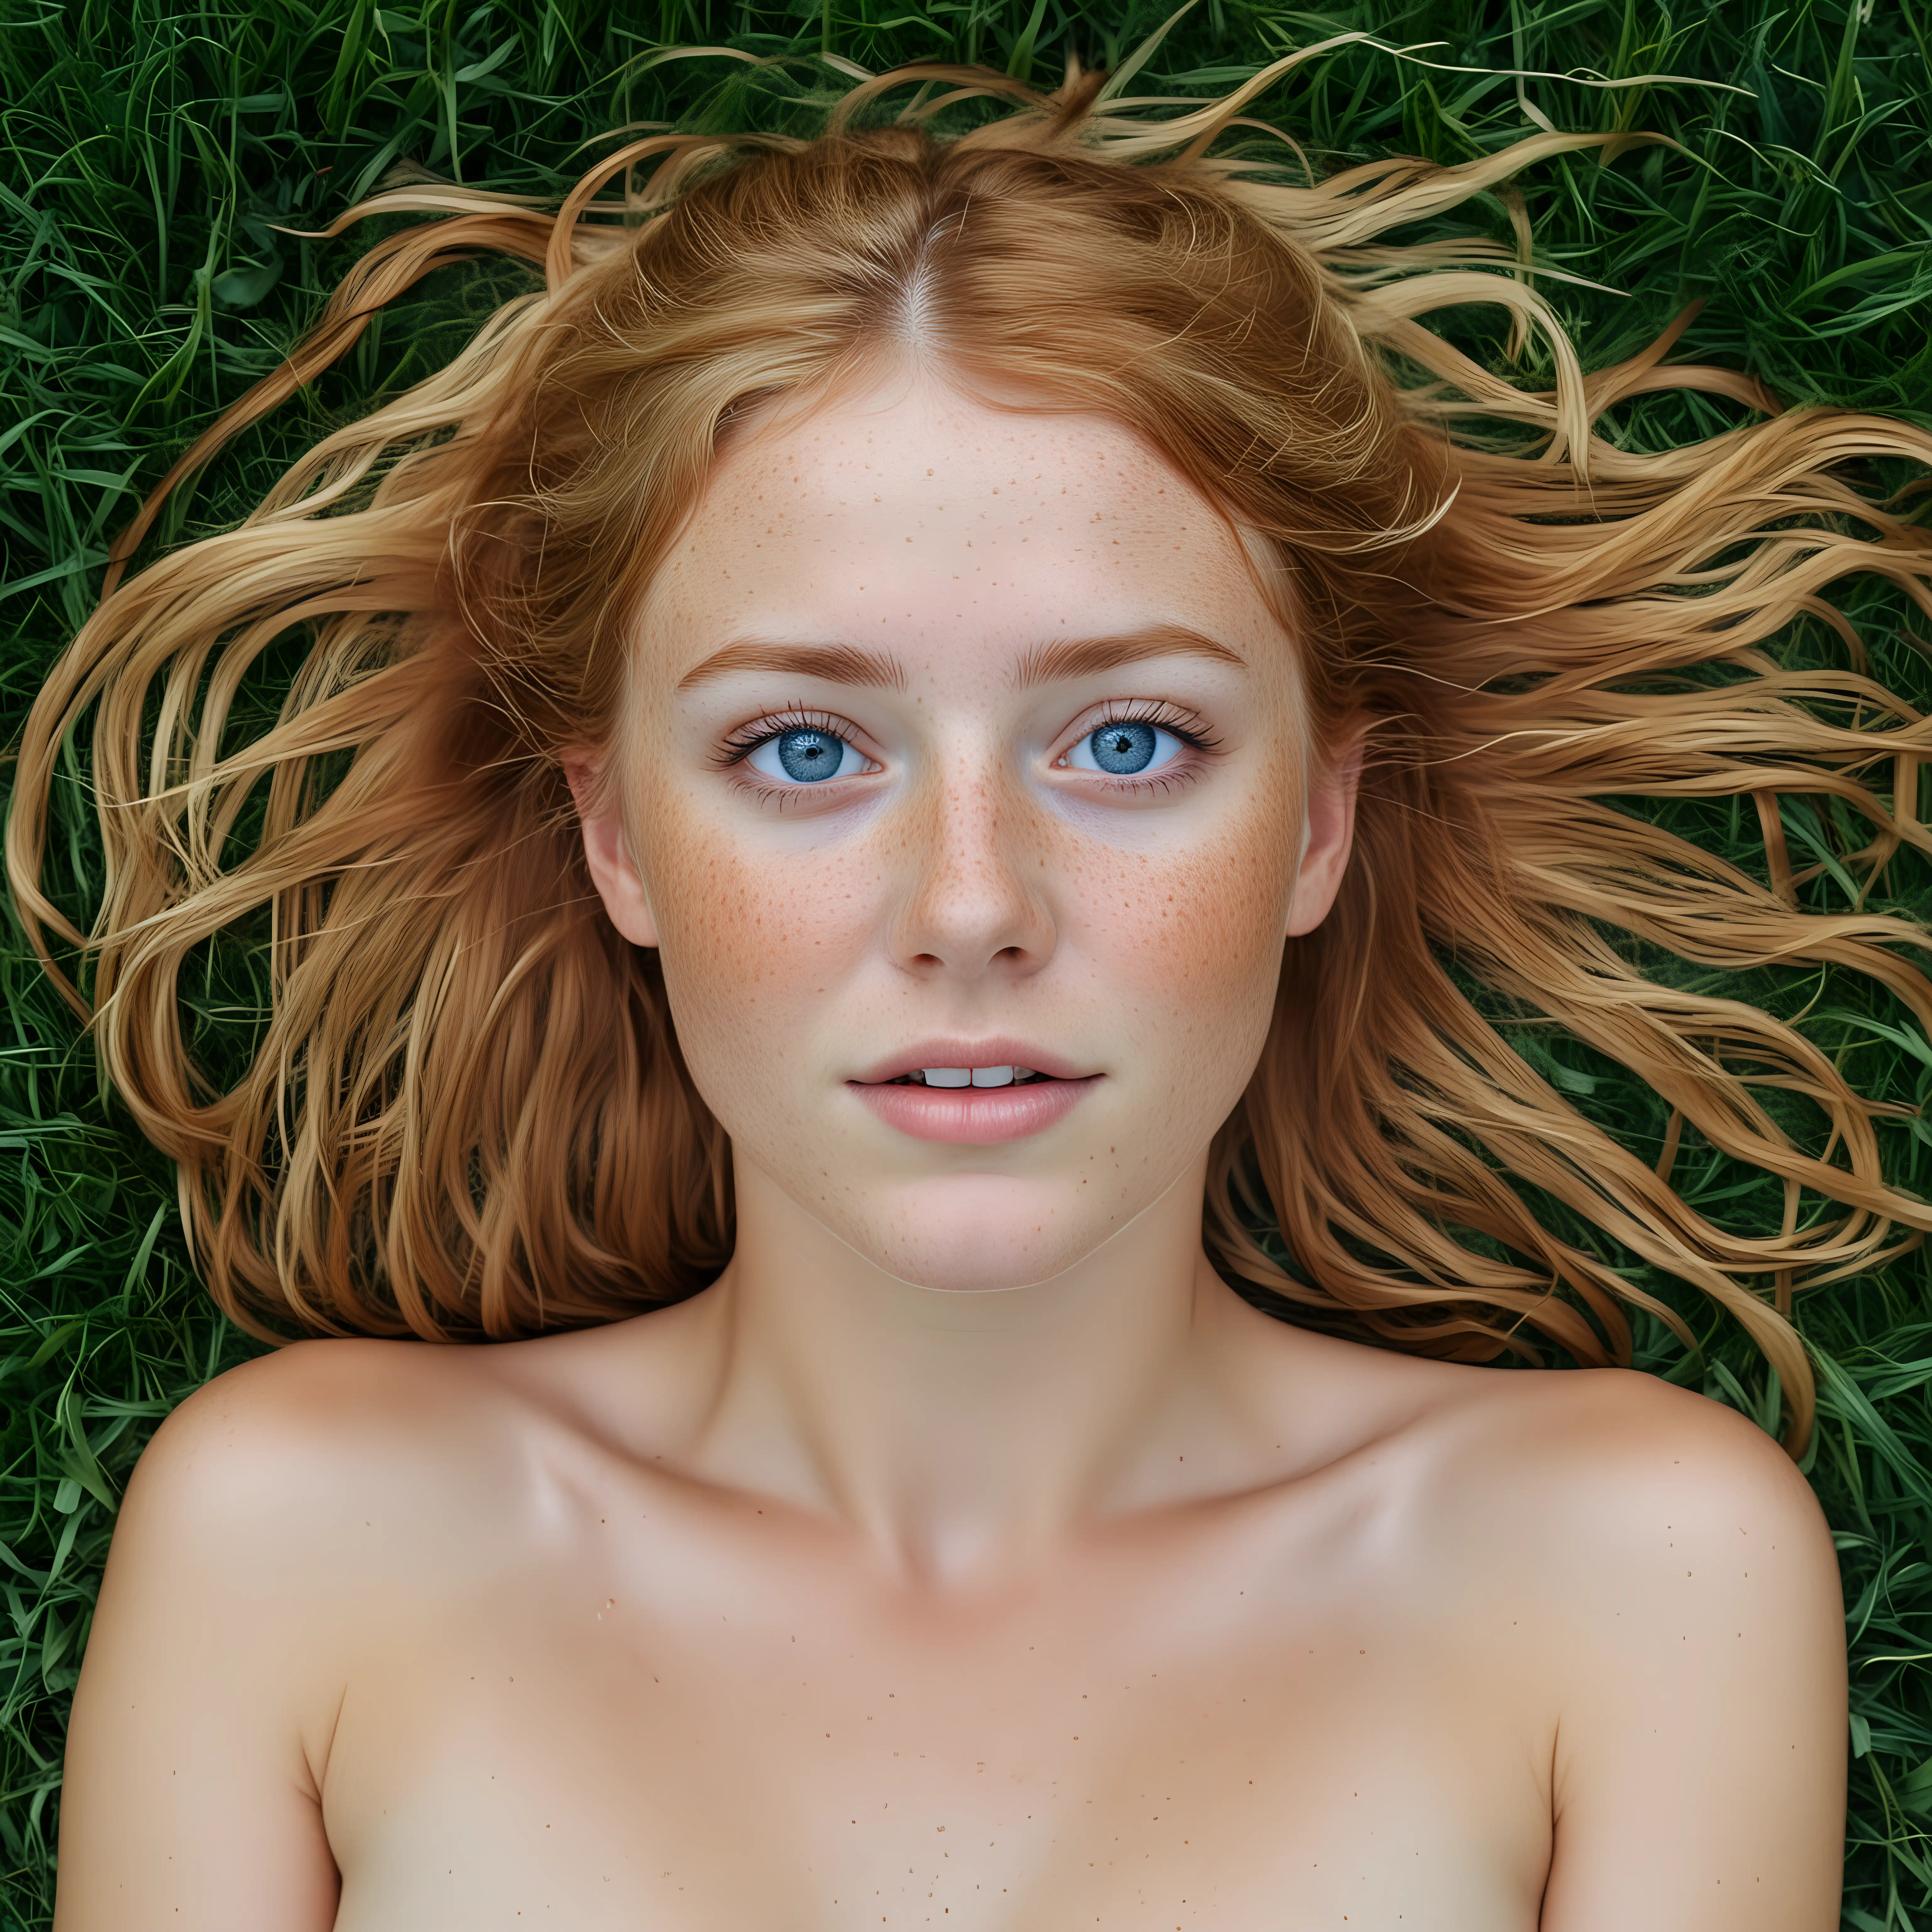 Frightened Blonde Girl Laying in Grass